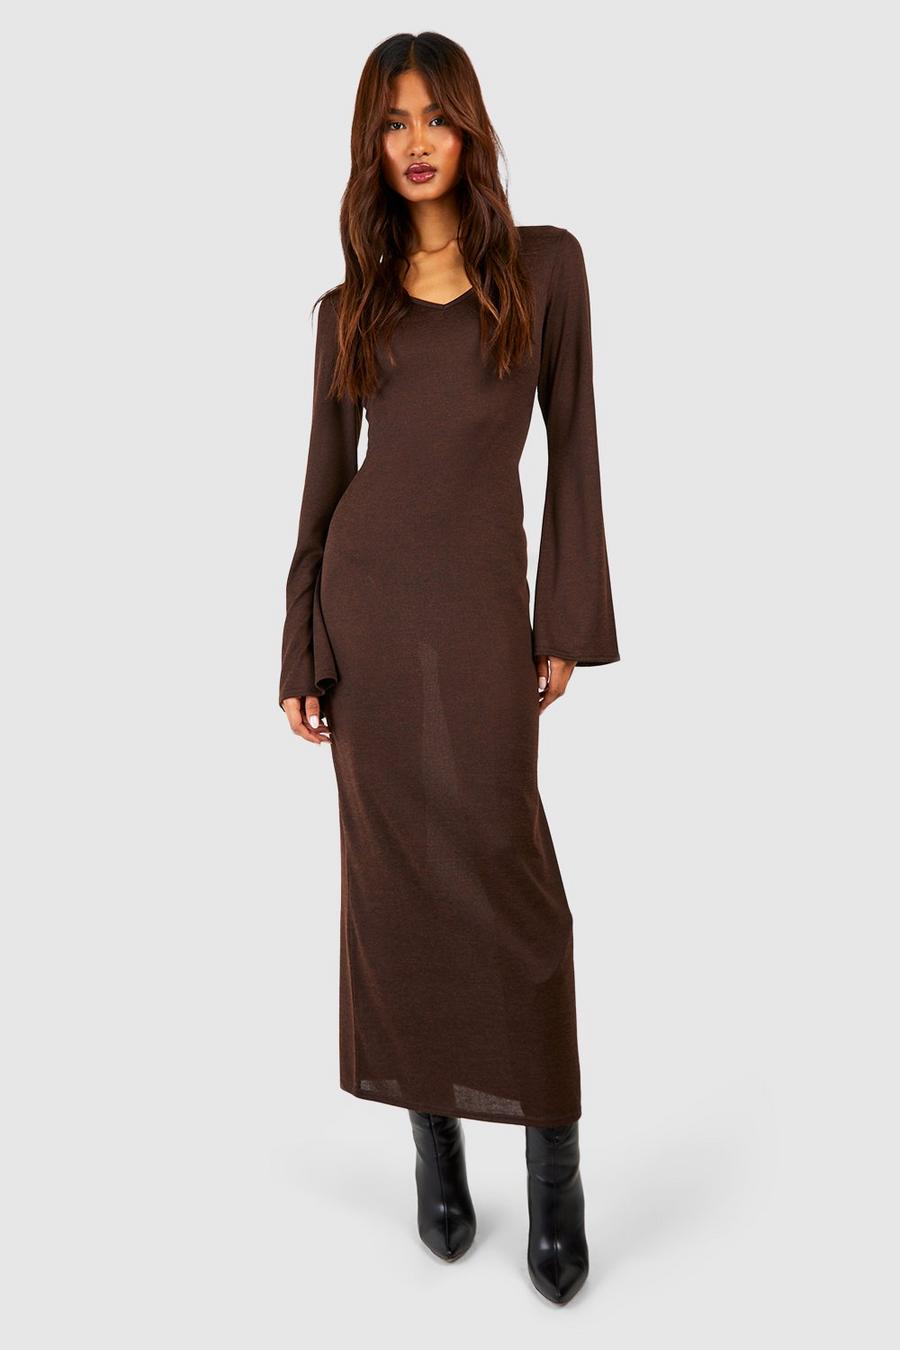 Chocolate marrone Tall Lightweight Knitted V Neck Flare Sleev Midaxi Dress